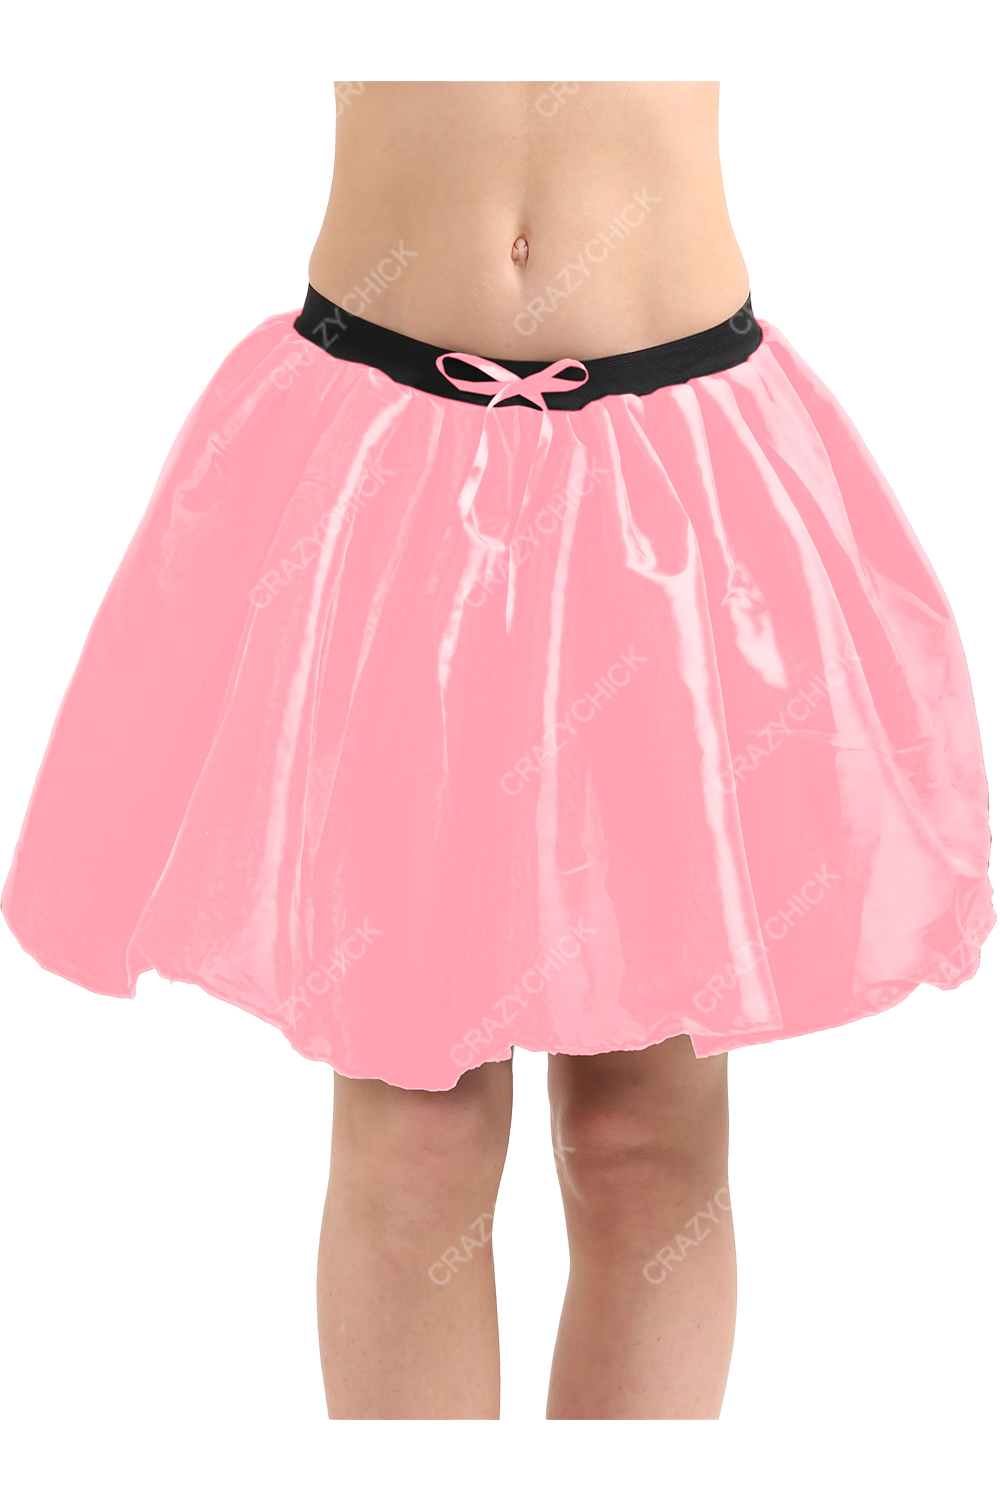 Crazy Chick Adult 3 Layers Baby Pink Satin Tutu Skirt (Approx 18 Inches Long)